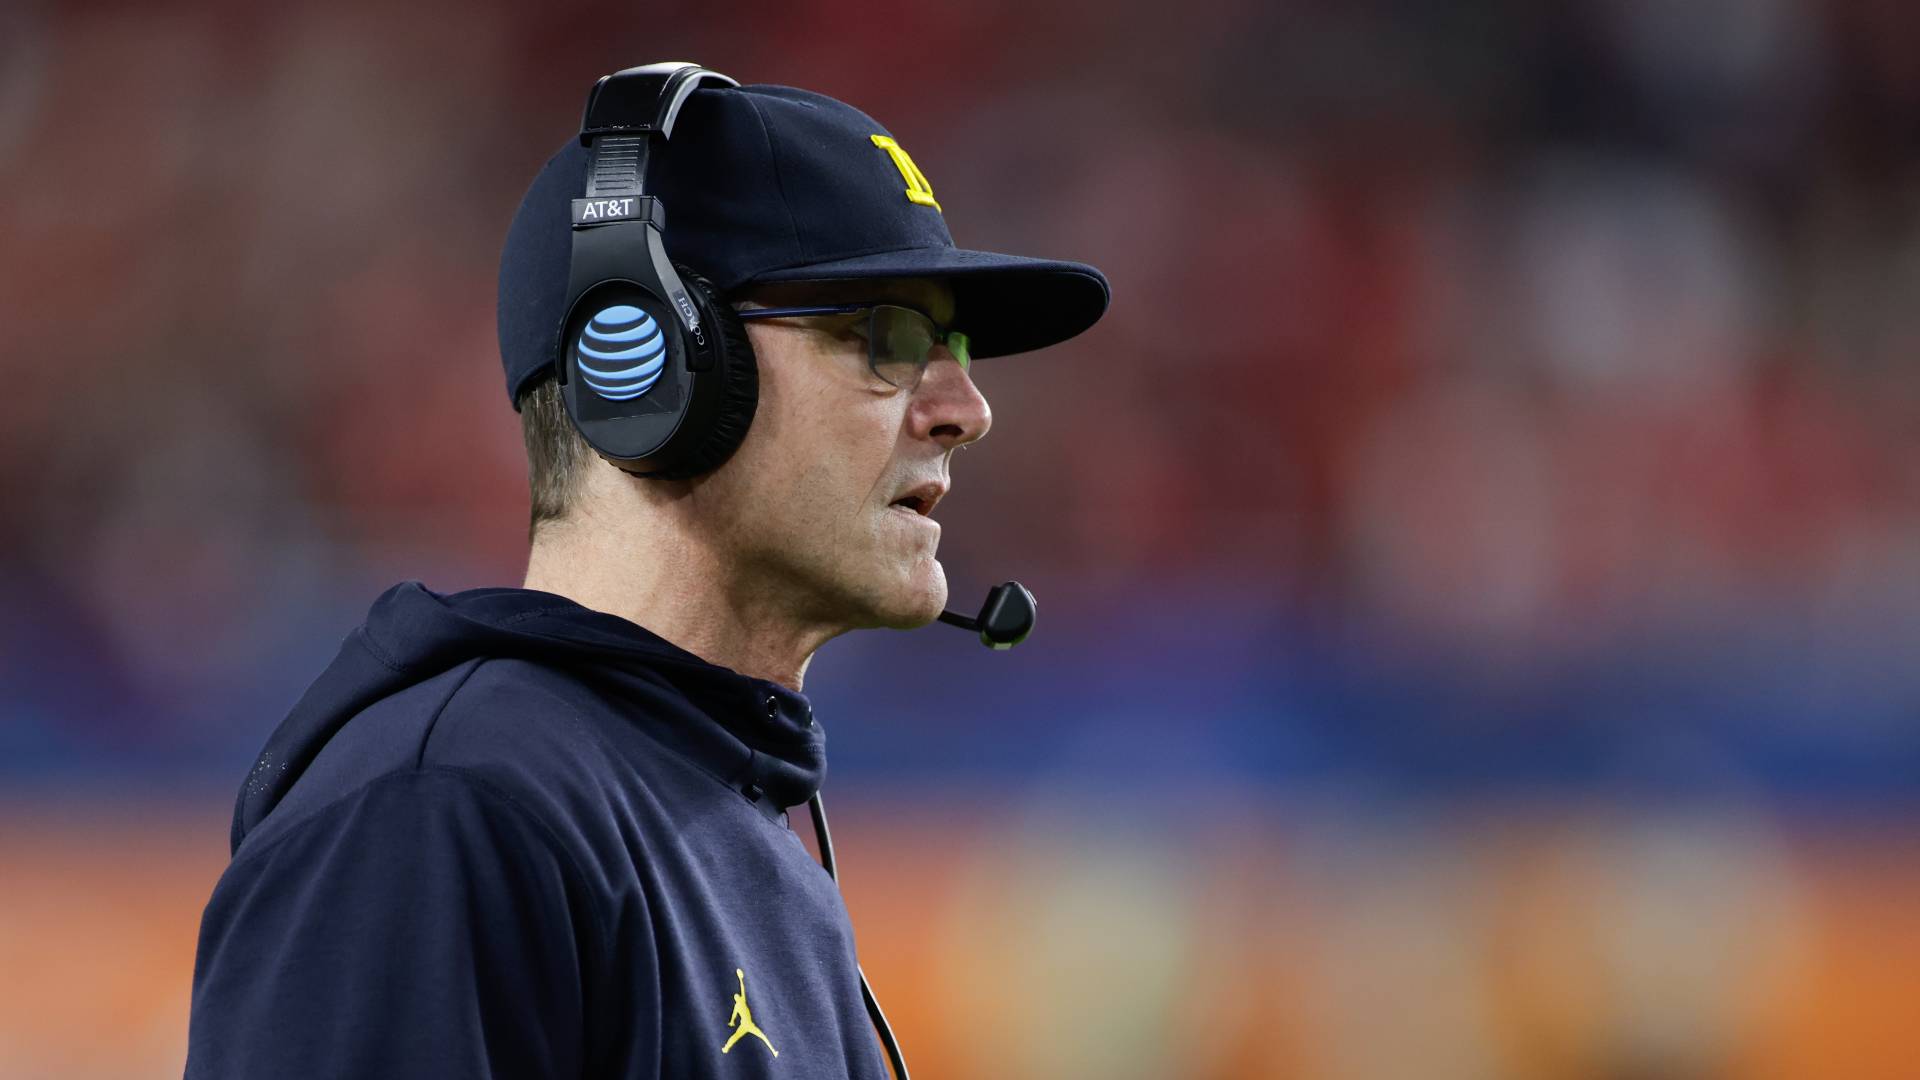 Jim Harbaugh rumors: Michigan coach told rookie he listens to NFL offers, has interest in Raiders